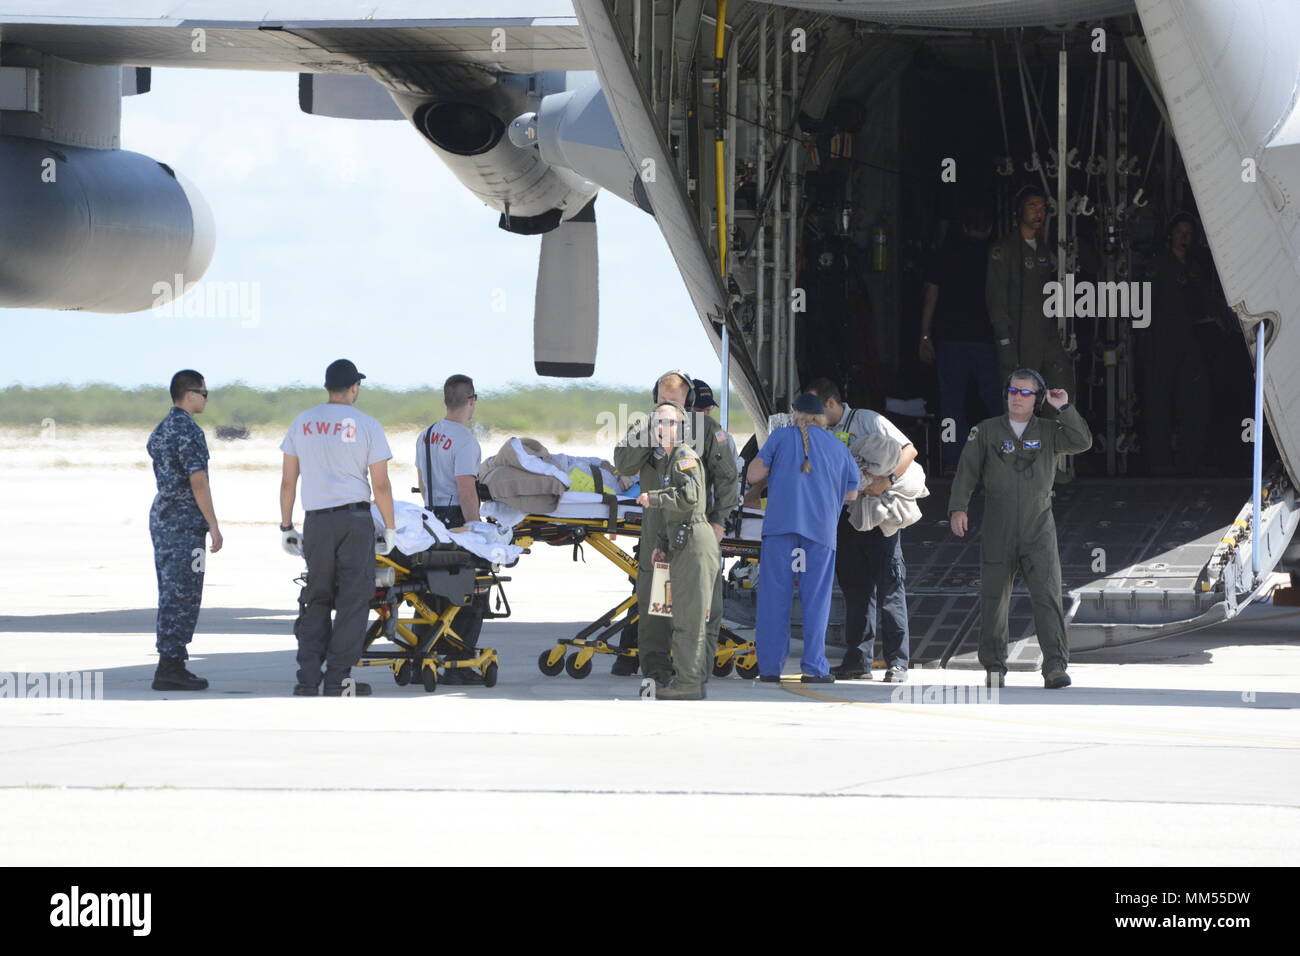 A patient from the Lower Keys Medical Center in Florida is loaded onto a North Carolina Air National Guard C-130 that arrived to assist with evacuation efforts prior to the arrival of Hurricane Irma, while at the Key West Naval Air Station, Key West Florida, Sept. 6, 2017. The patients were evacuated prior to the arrival of Hurricane Irma, a category five storm that is expected to cause catastrophic damage to the regions it makes landfall. The 156th Aeromedical Evacuation Squadron of the North Carolina Air National Guard provides medical care for wounded individuals while transporting them to  Stock Photo